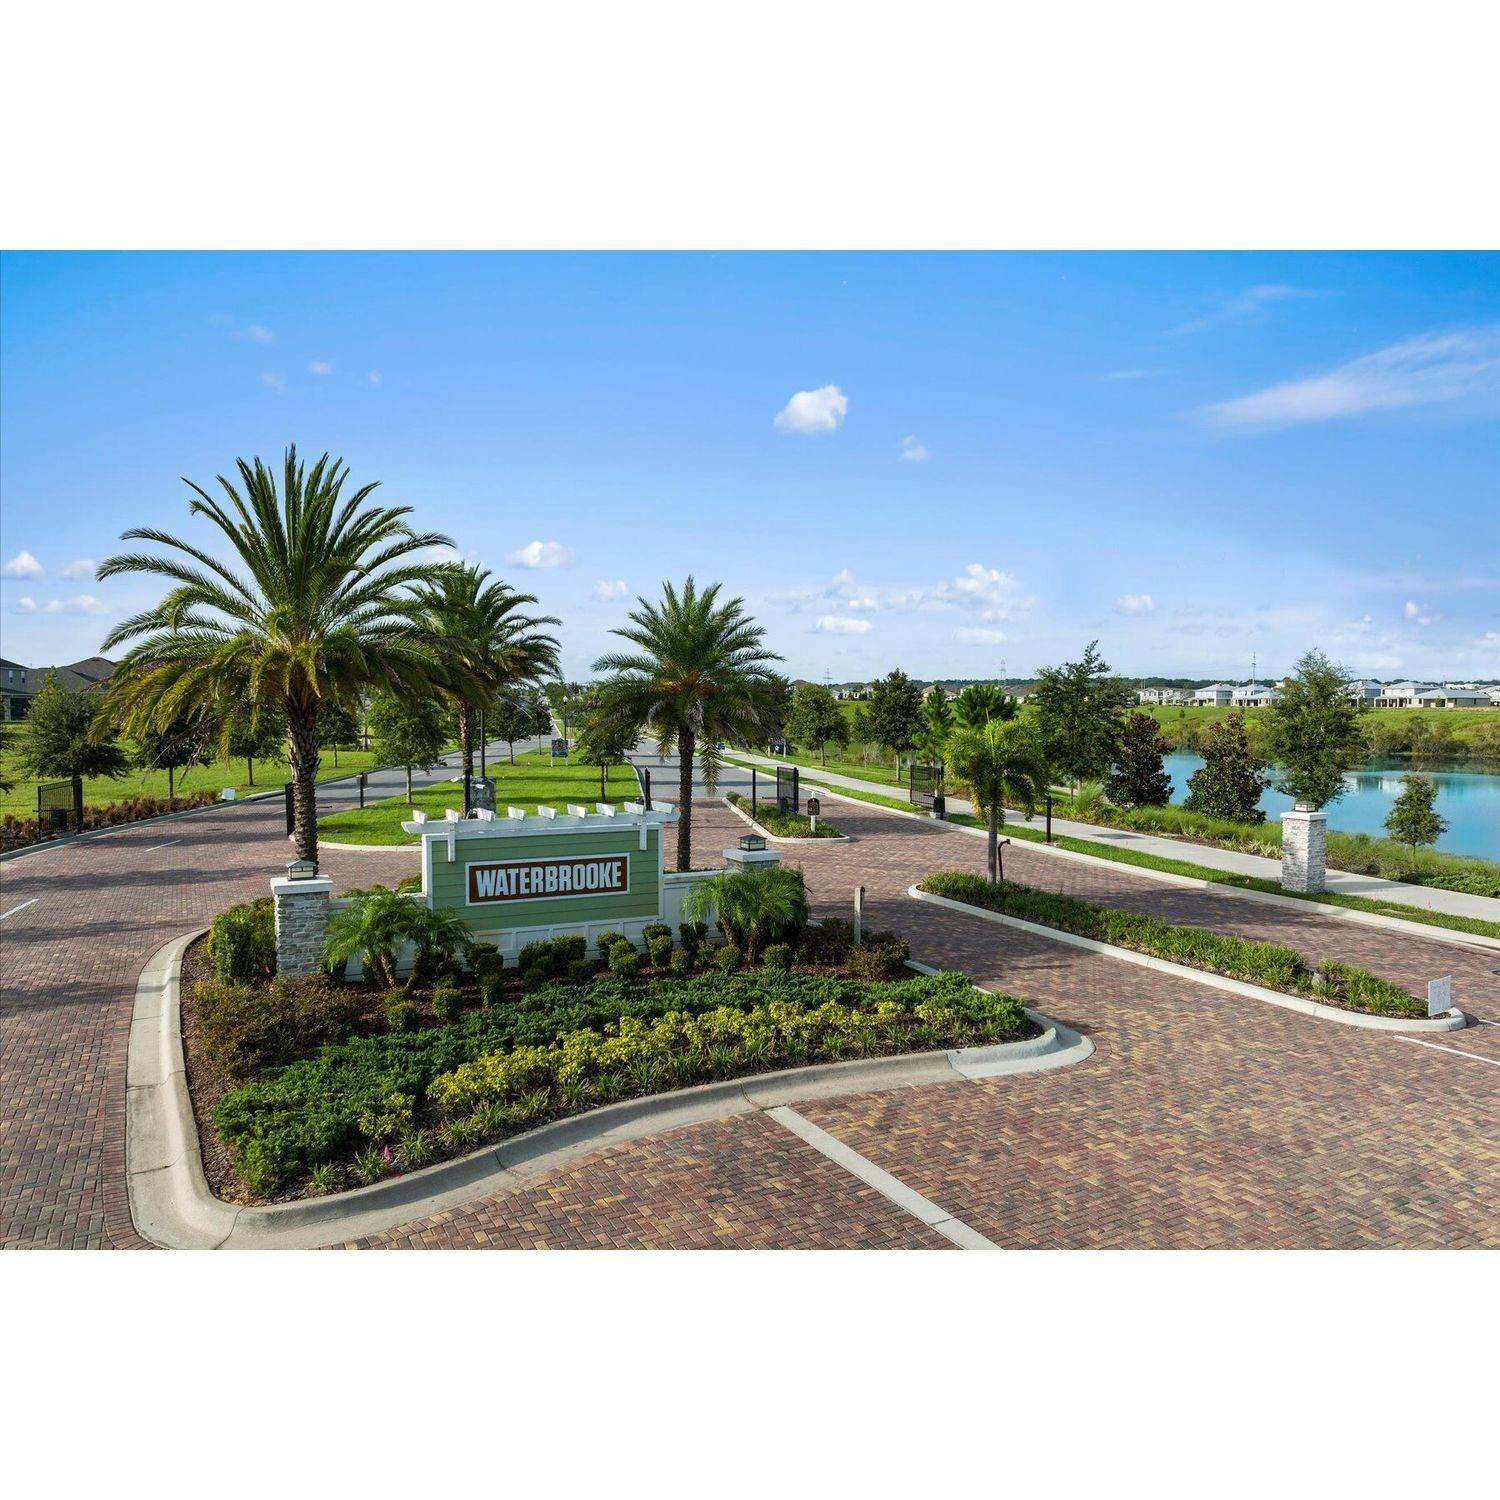 4. Waterbrooke bâtiment à 3029 Ambersweet Place, Clermont, FL 34711